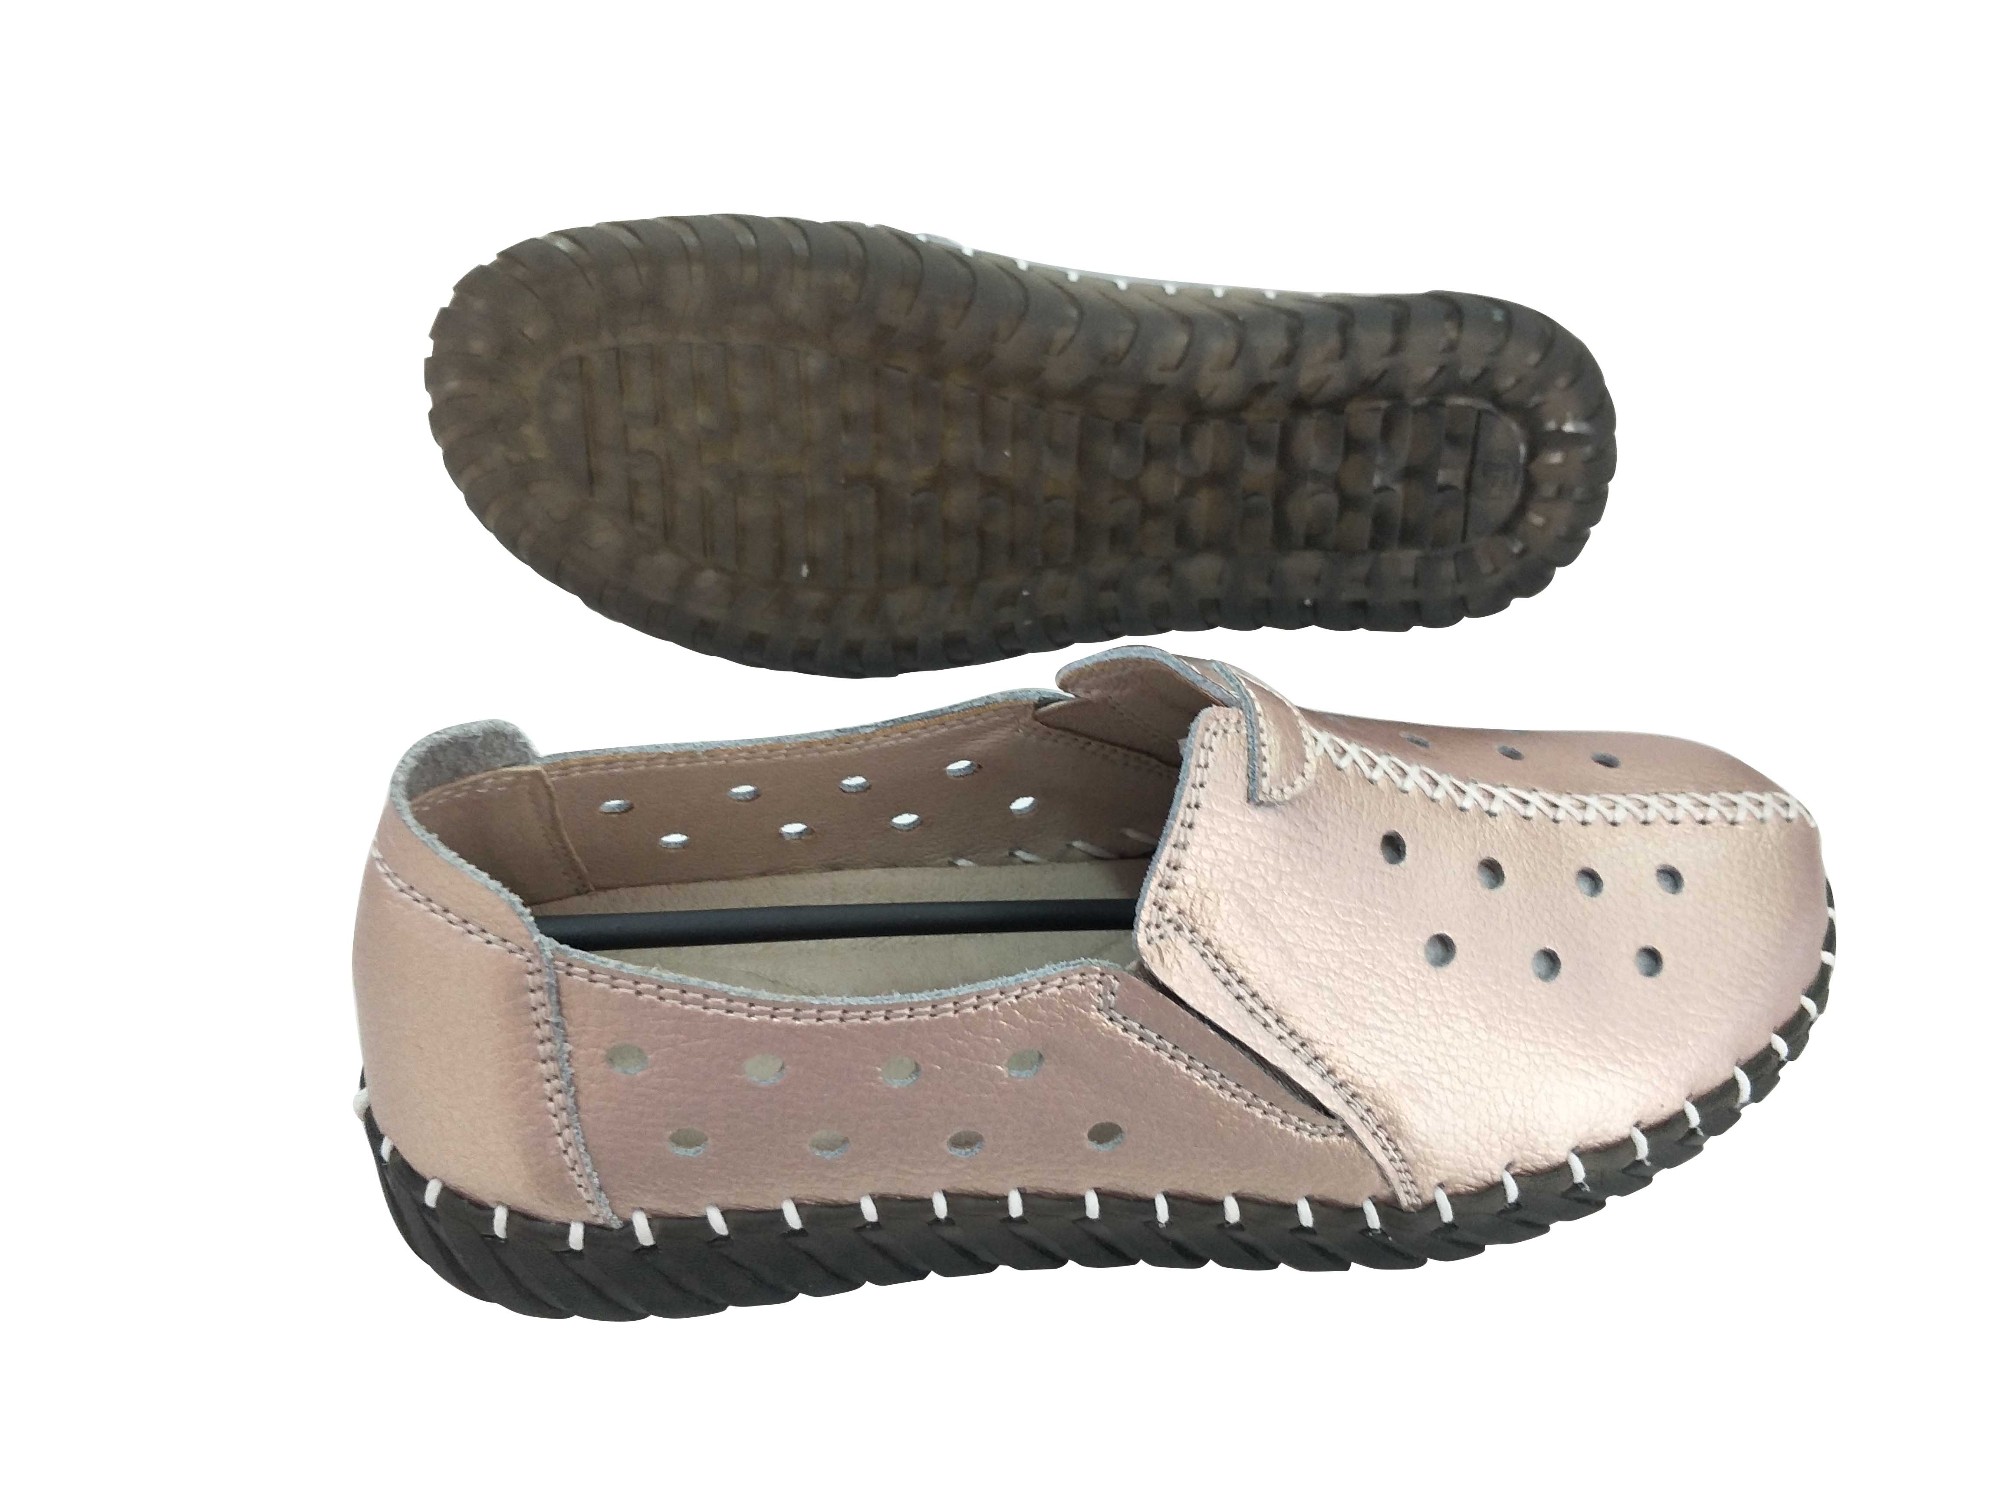 Hand-made leather hollow-out sandal women slip on causal flat shoes Manufacturers, Hand-made leather hollow-out sandal women slip on causal flat shoes Factory, Supply Hand-made leather hollow-out sandal women slip on causal flat shoes